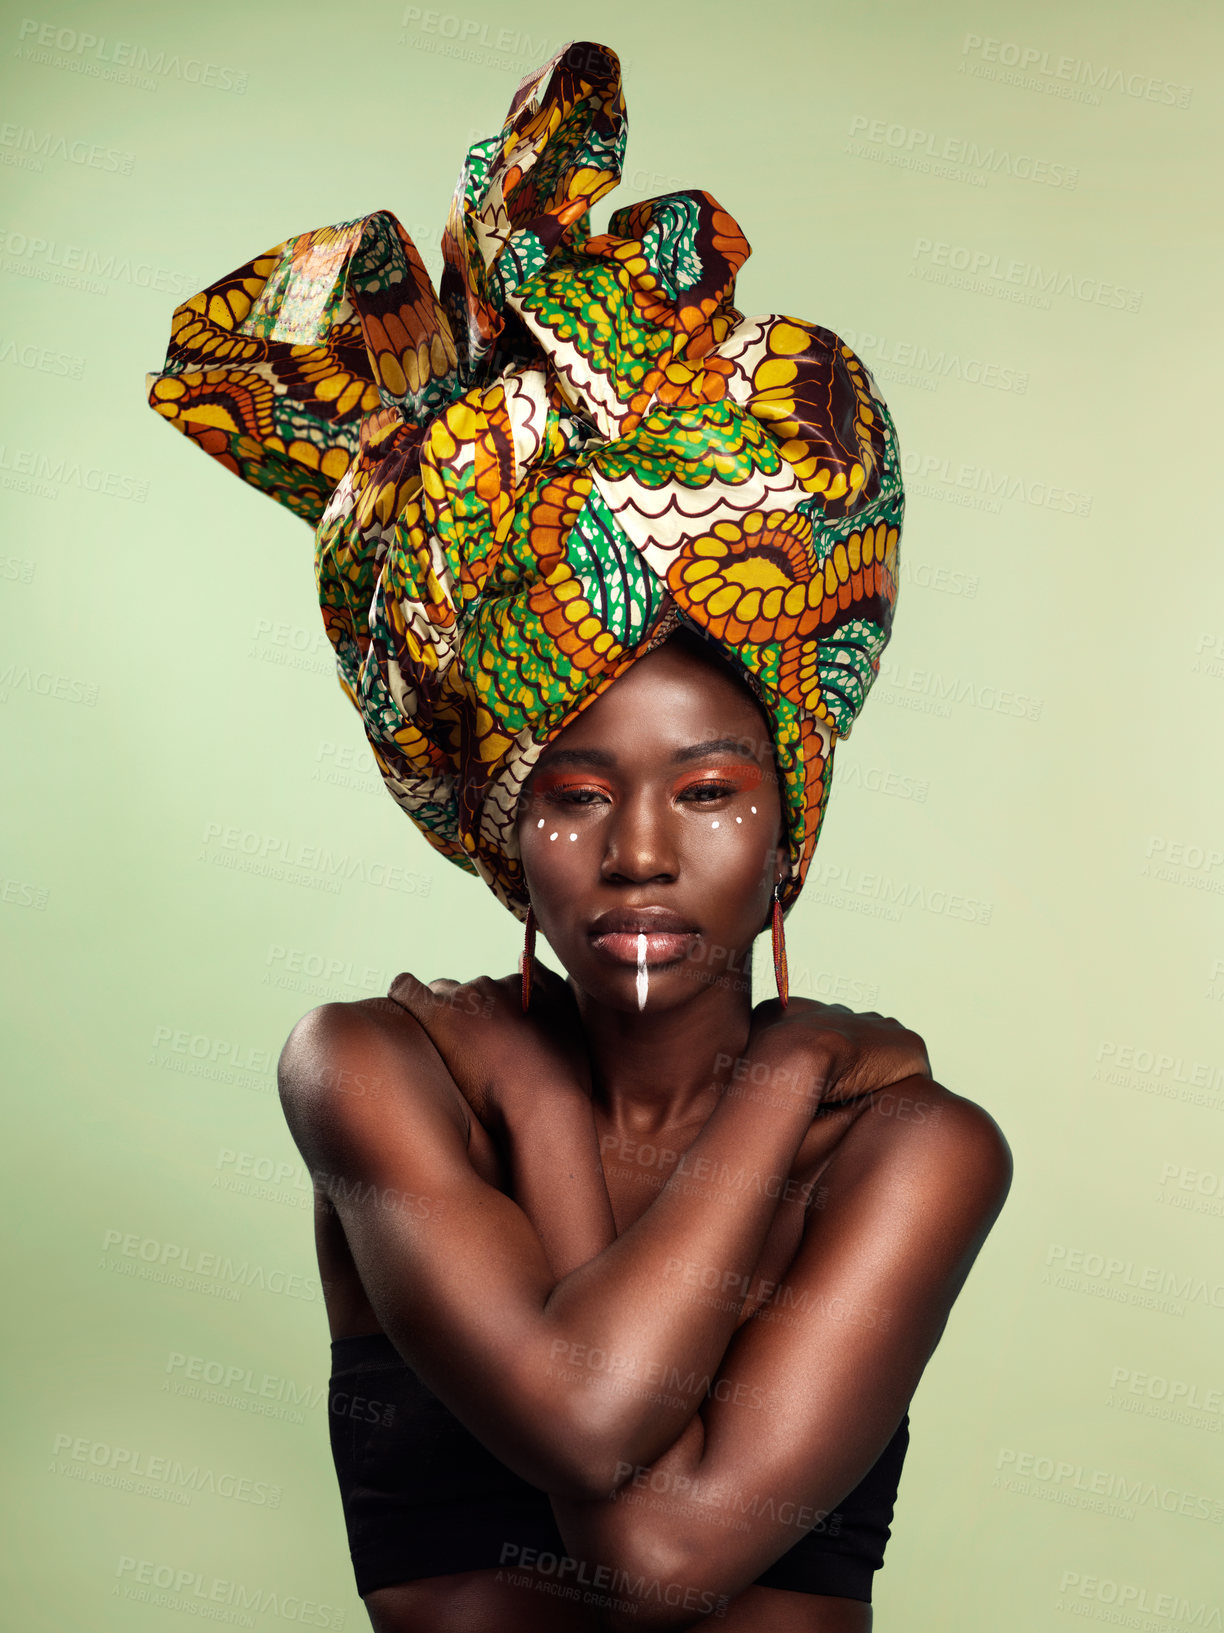 Buy stock photo Studio shot of a beautiful young woman wearing a traditional African head wrap against a green background